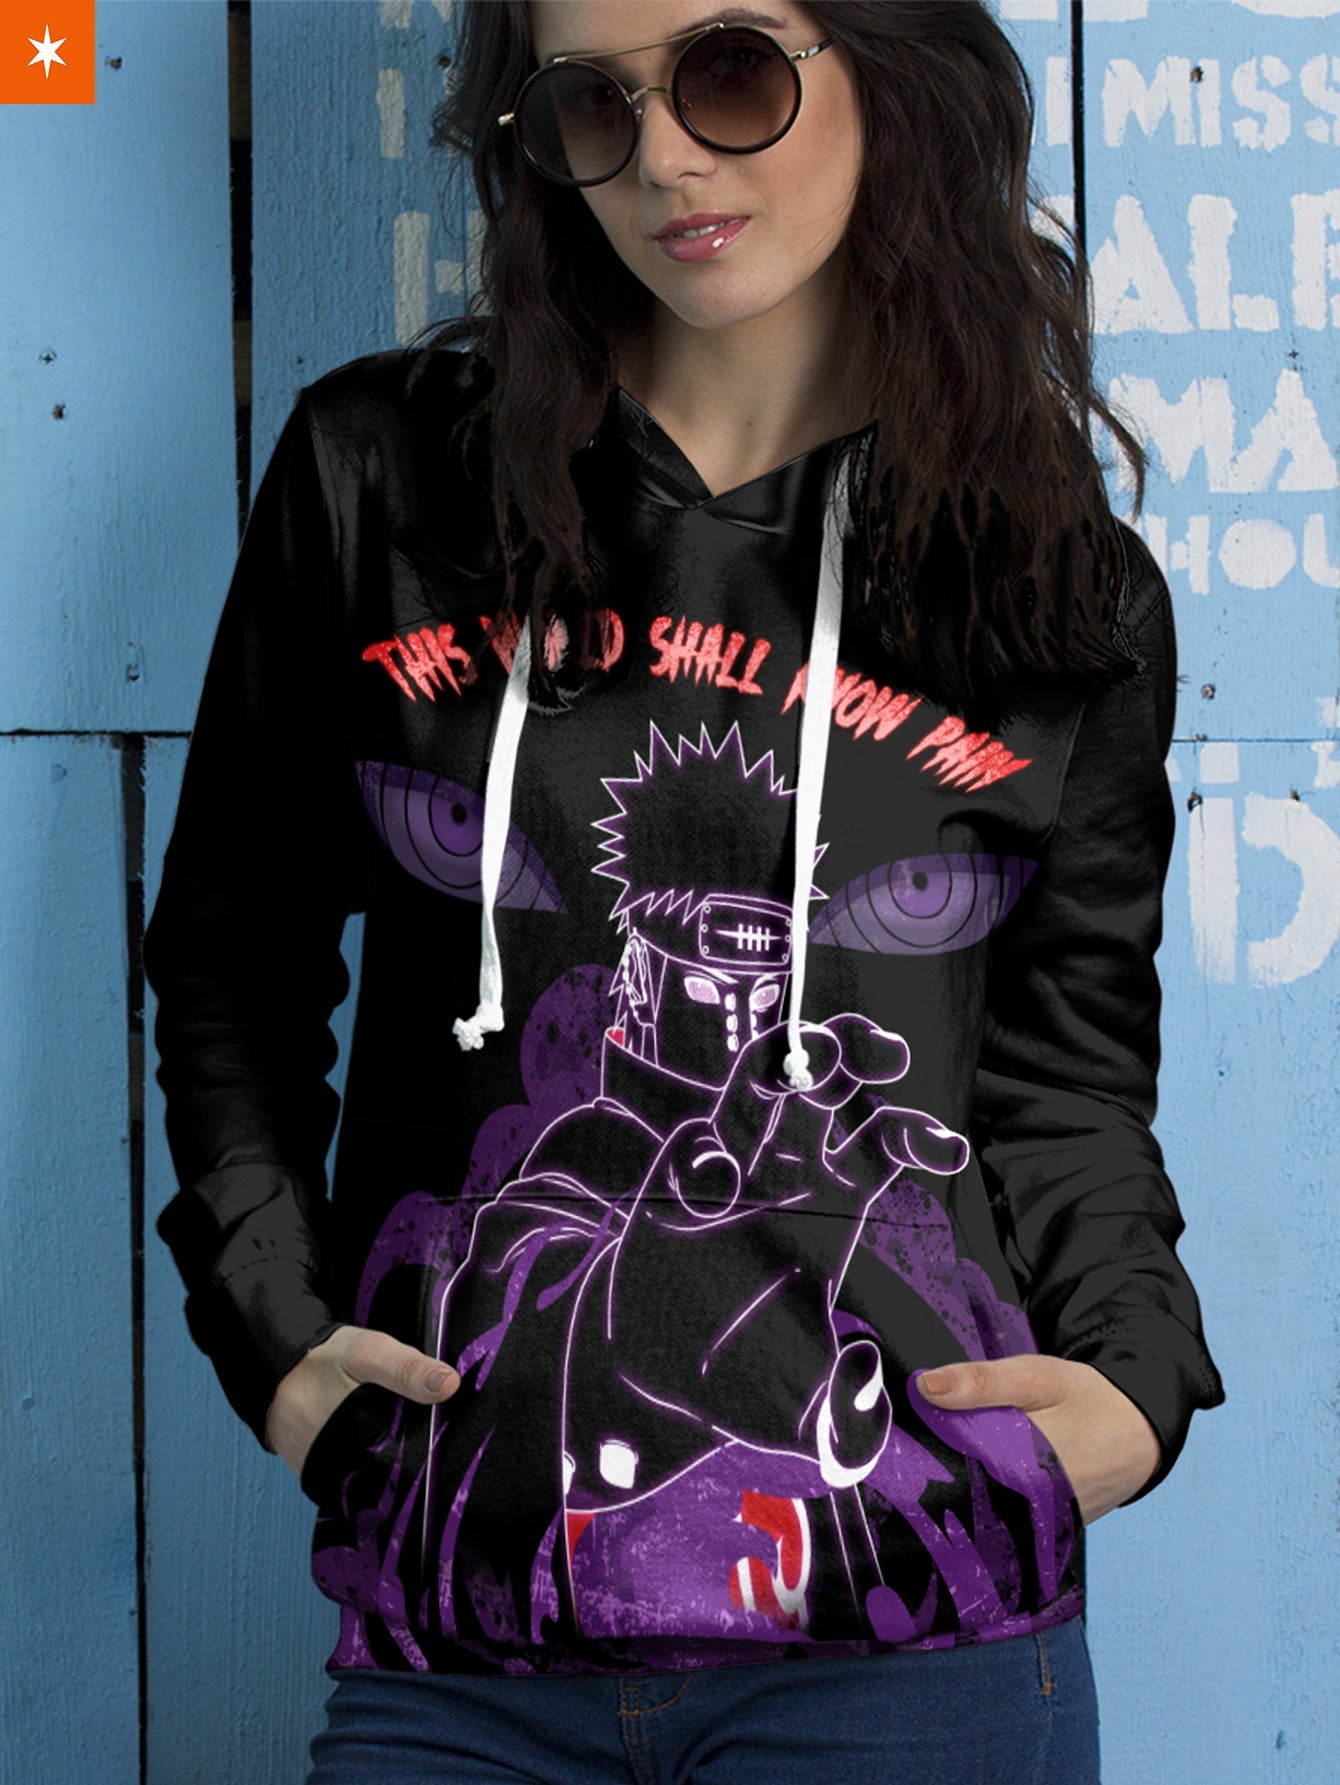 Fandomaniax - World Shall Know Pain Unisex Pullover Hoodie